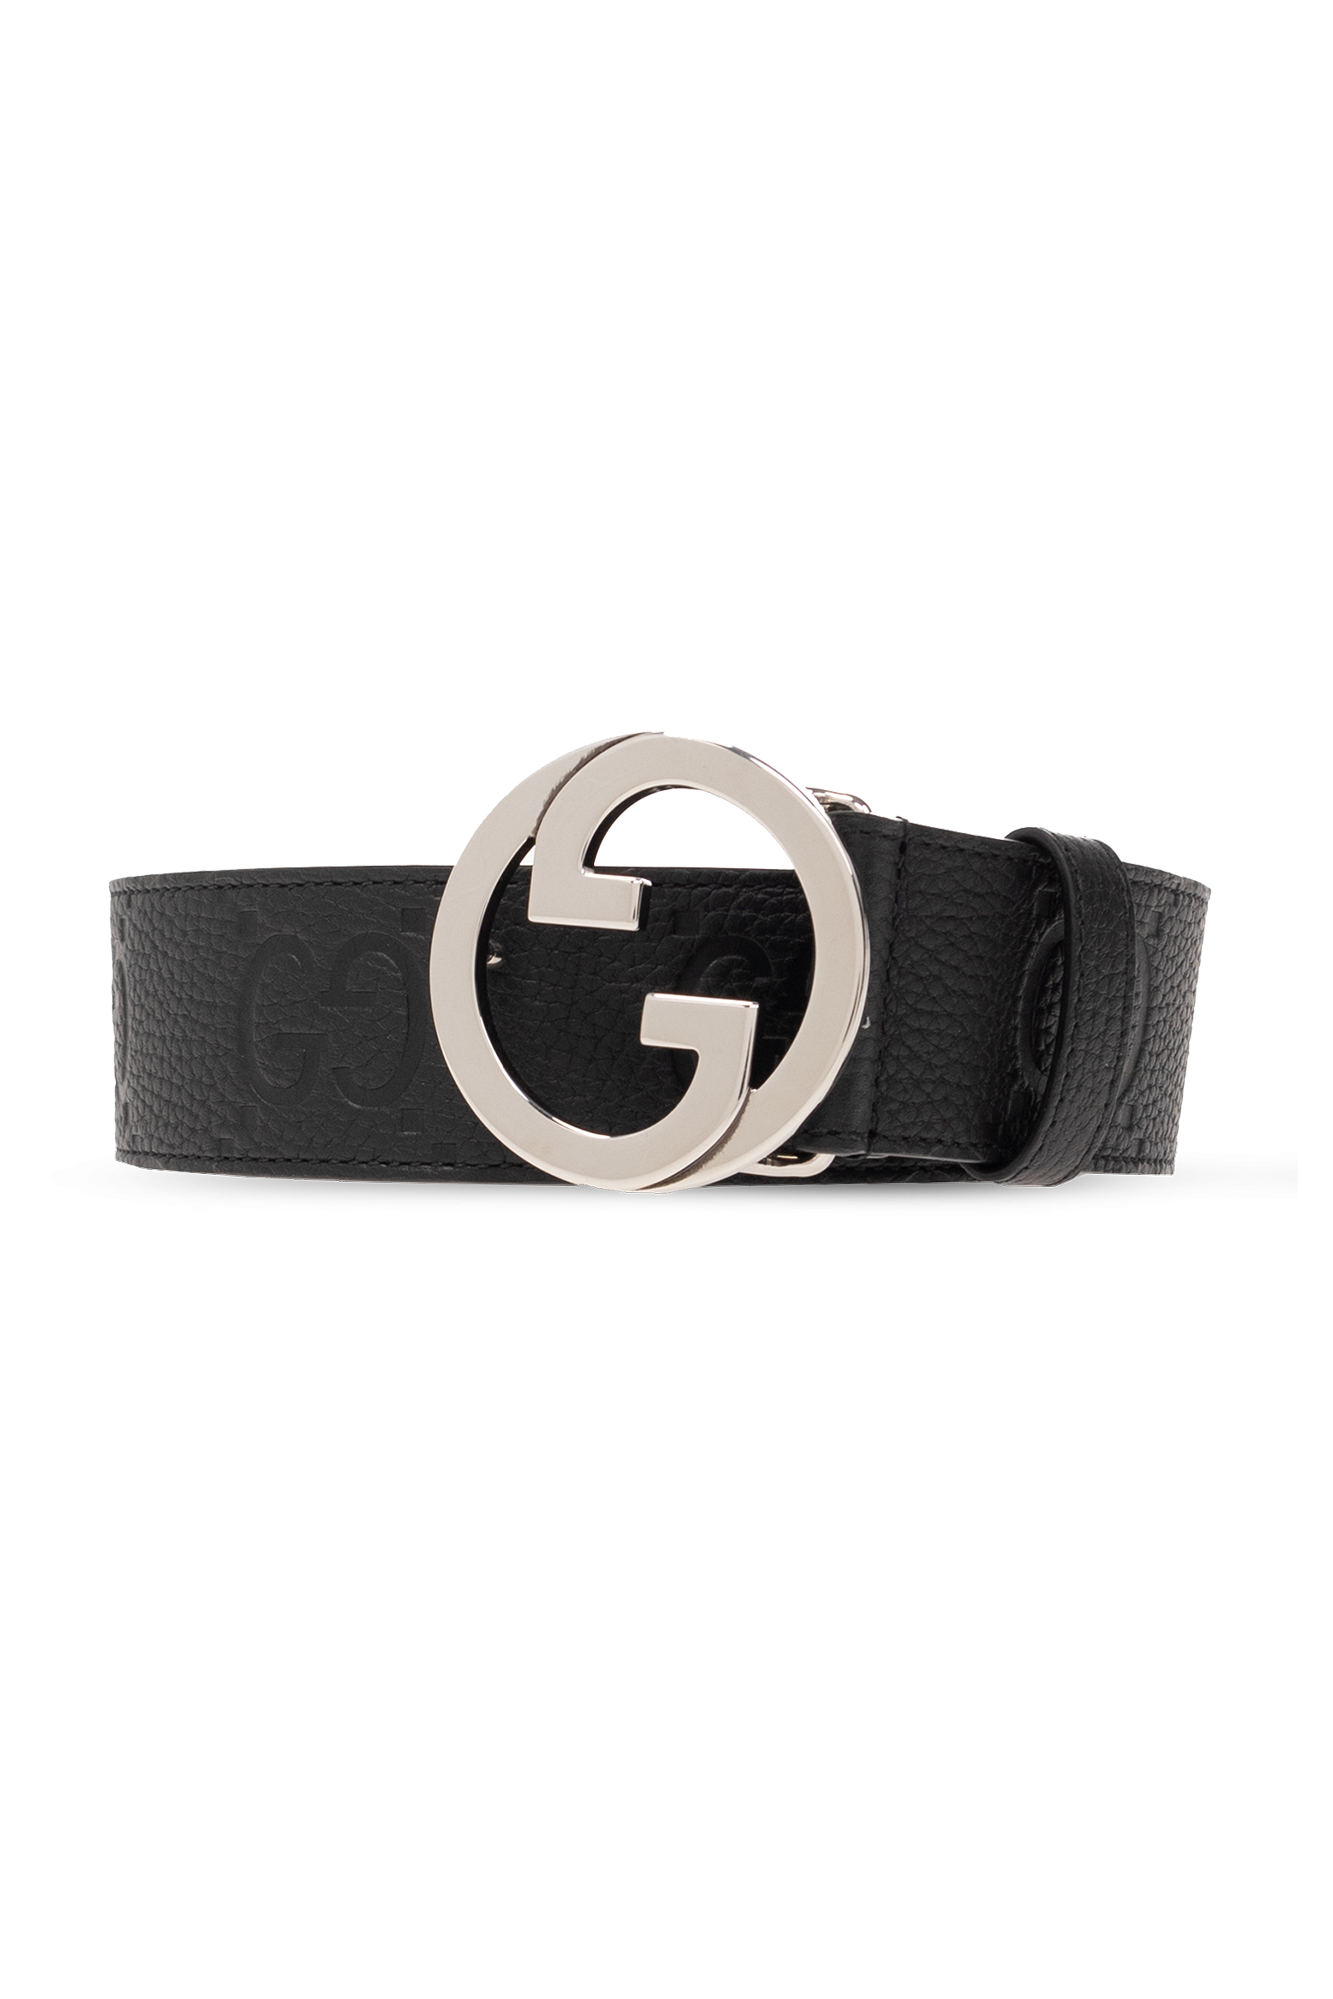 Gucci Leather belt with logo